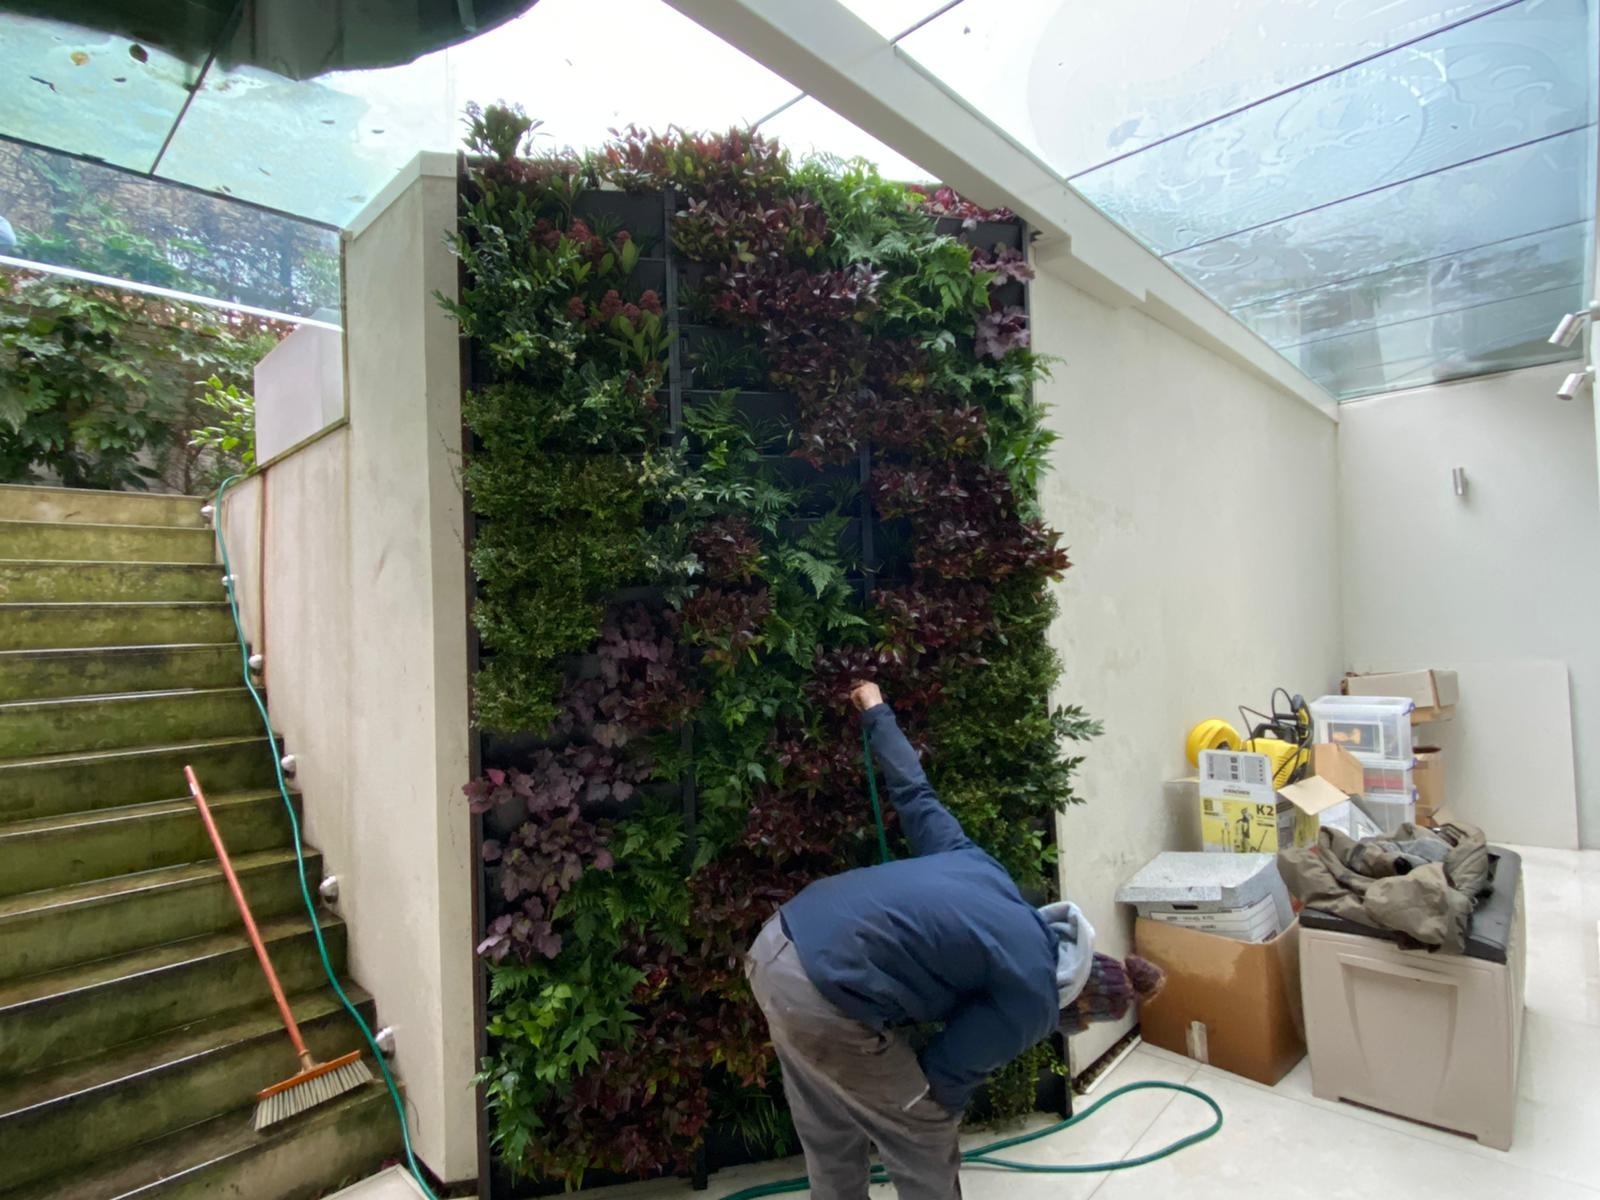 replacing a living wall